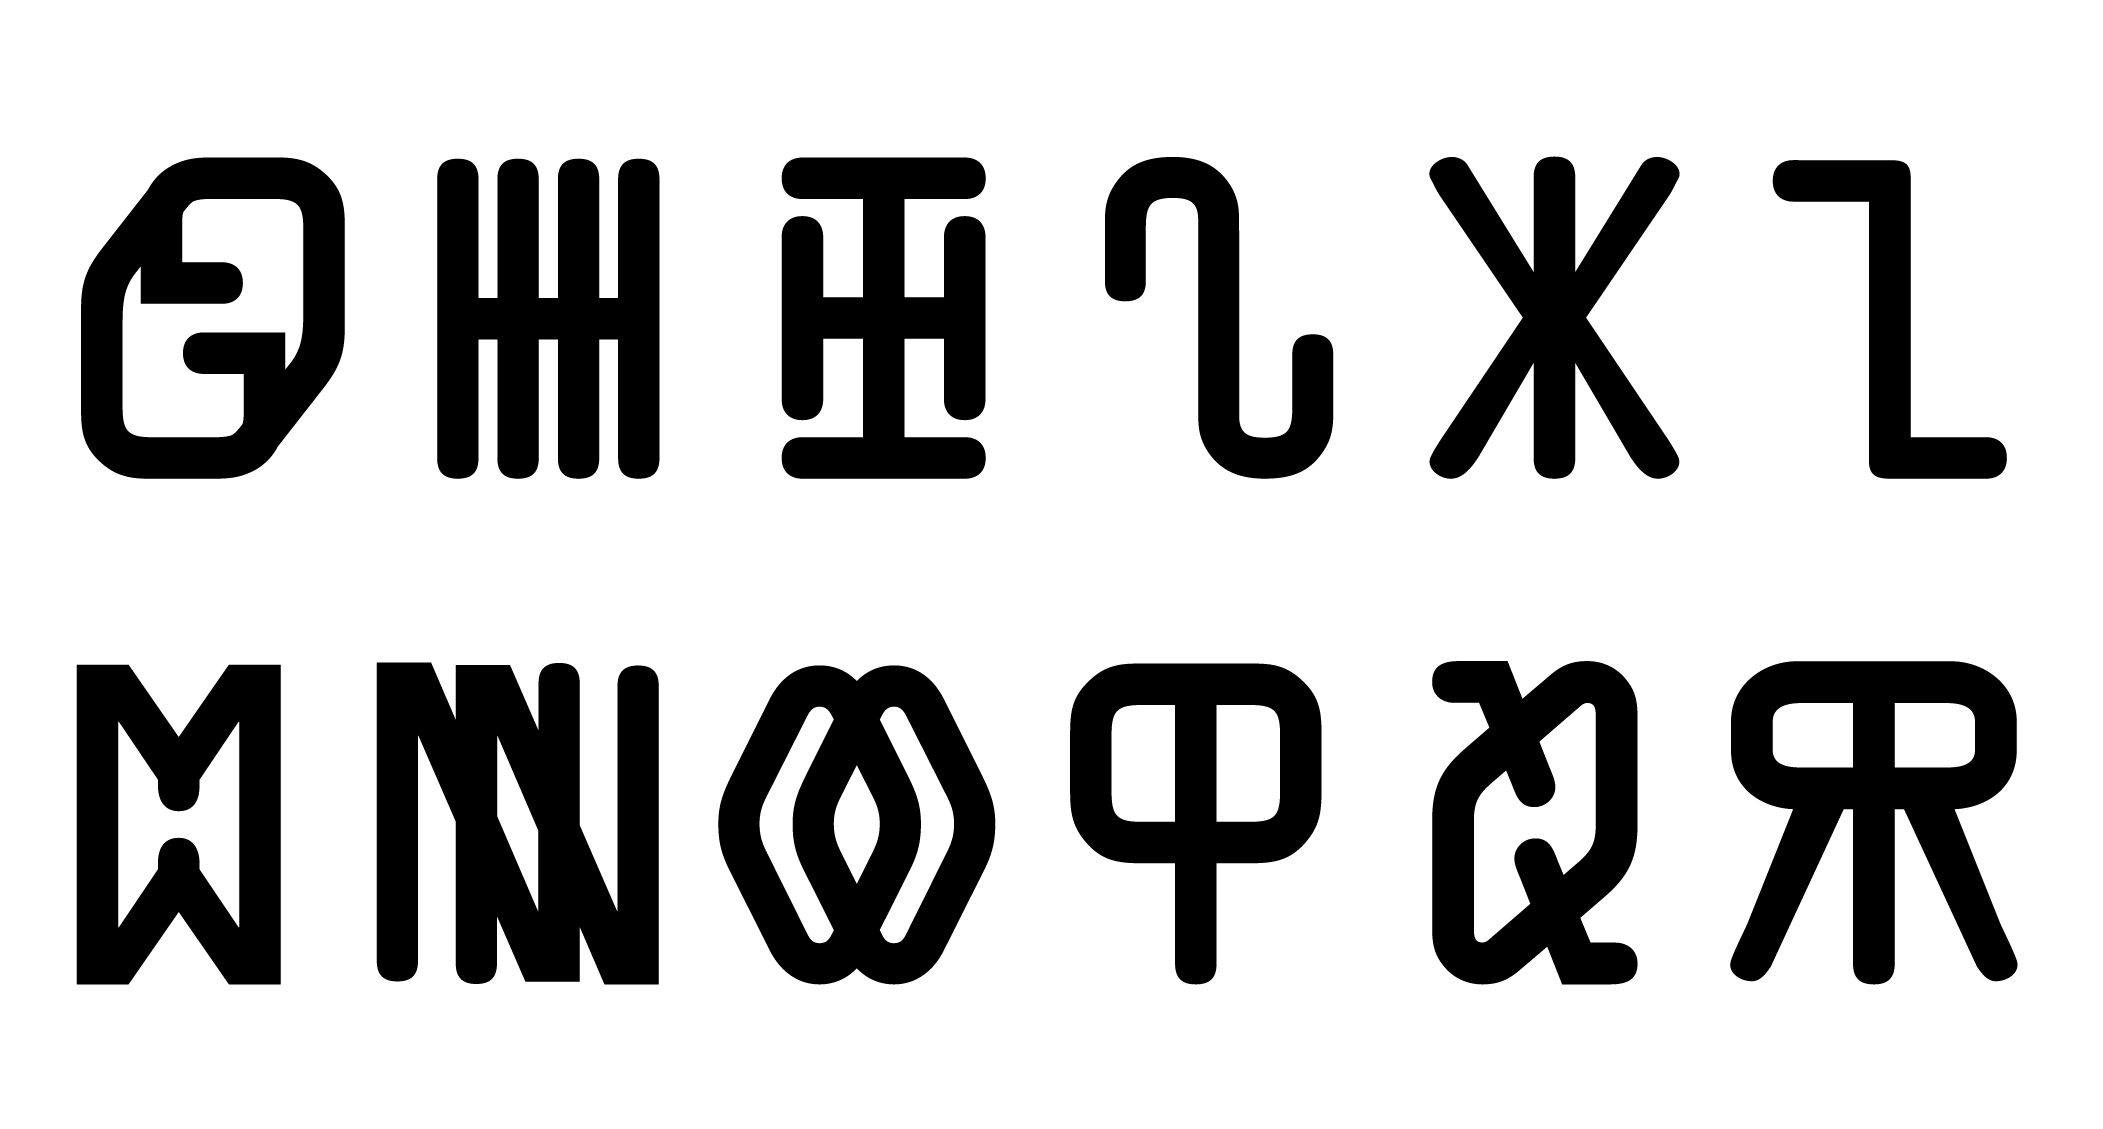 A set of icons or characters from an unknown language.